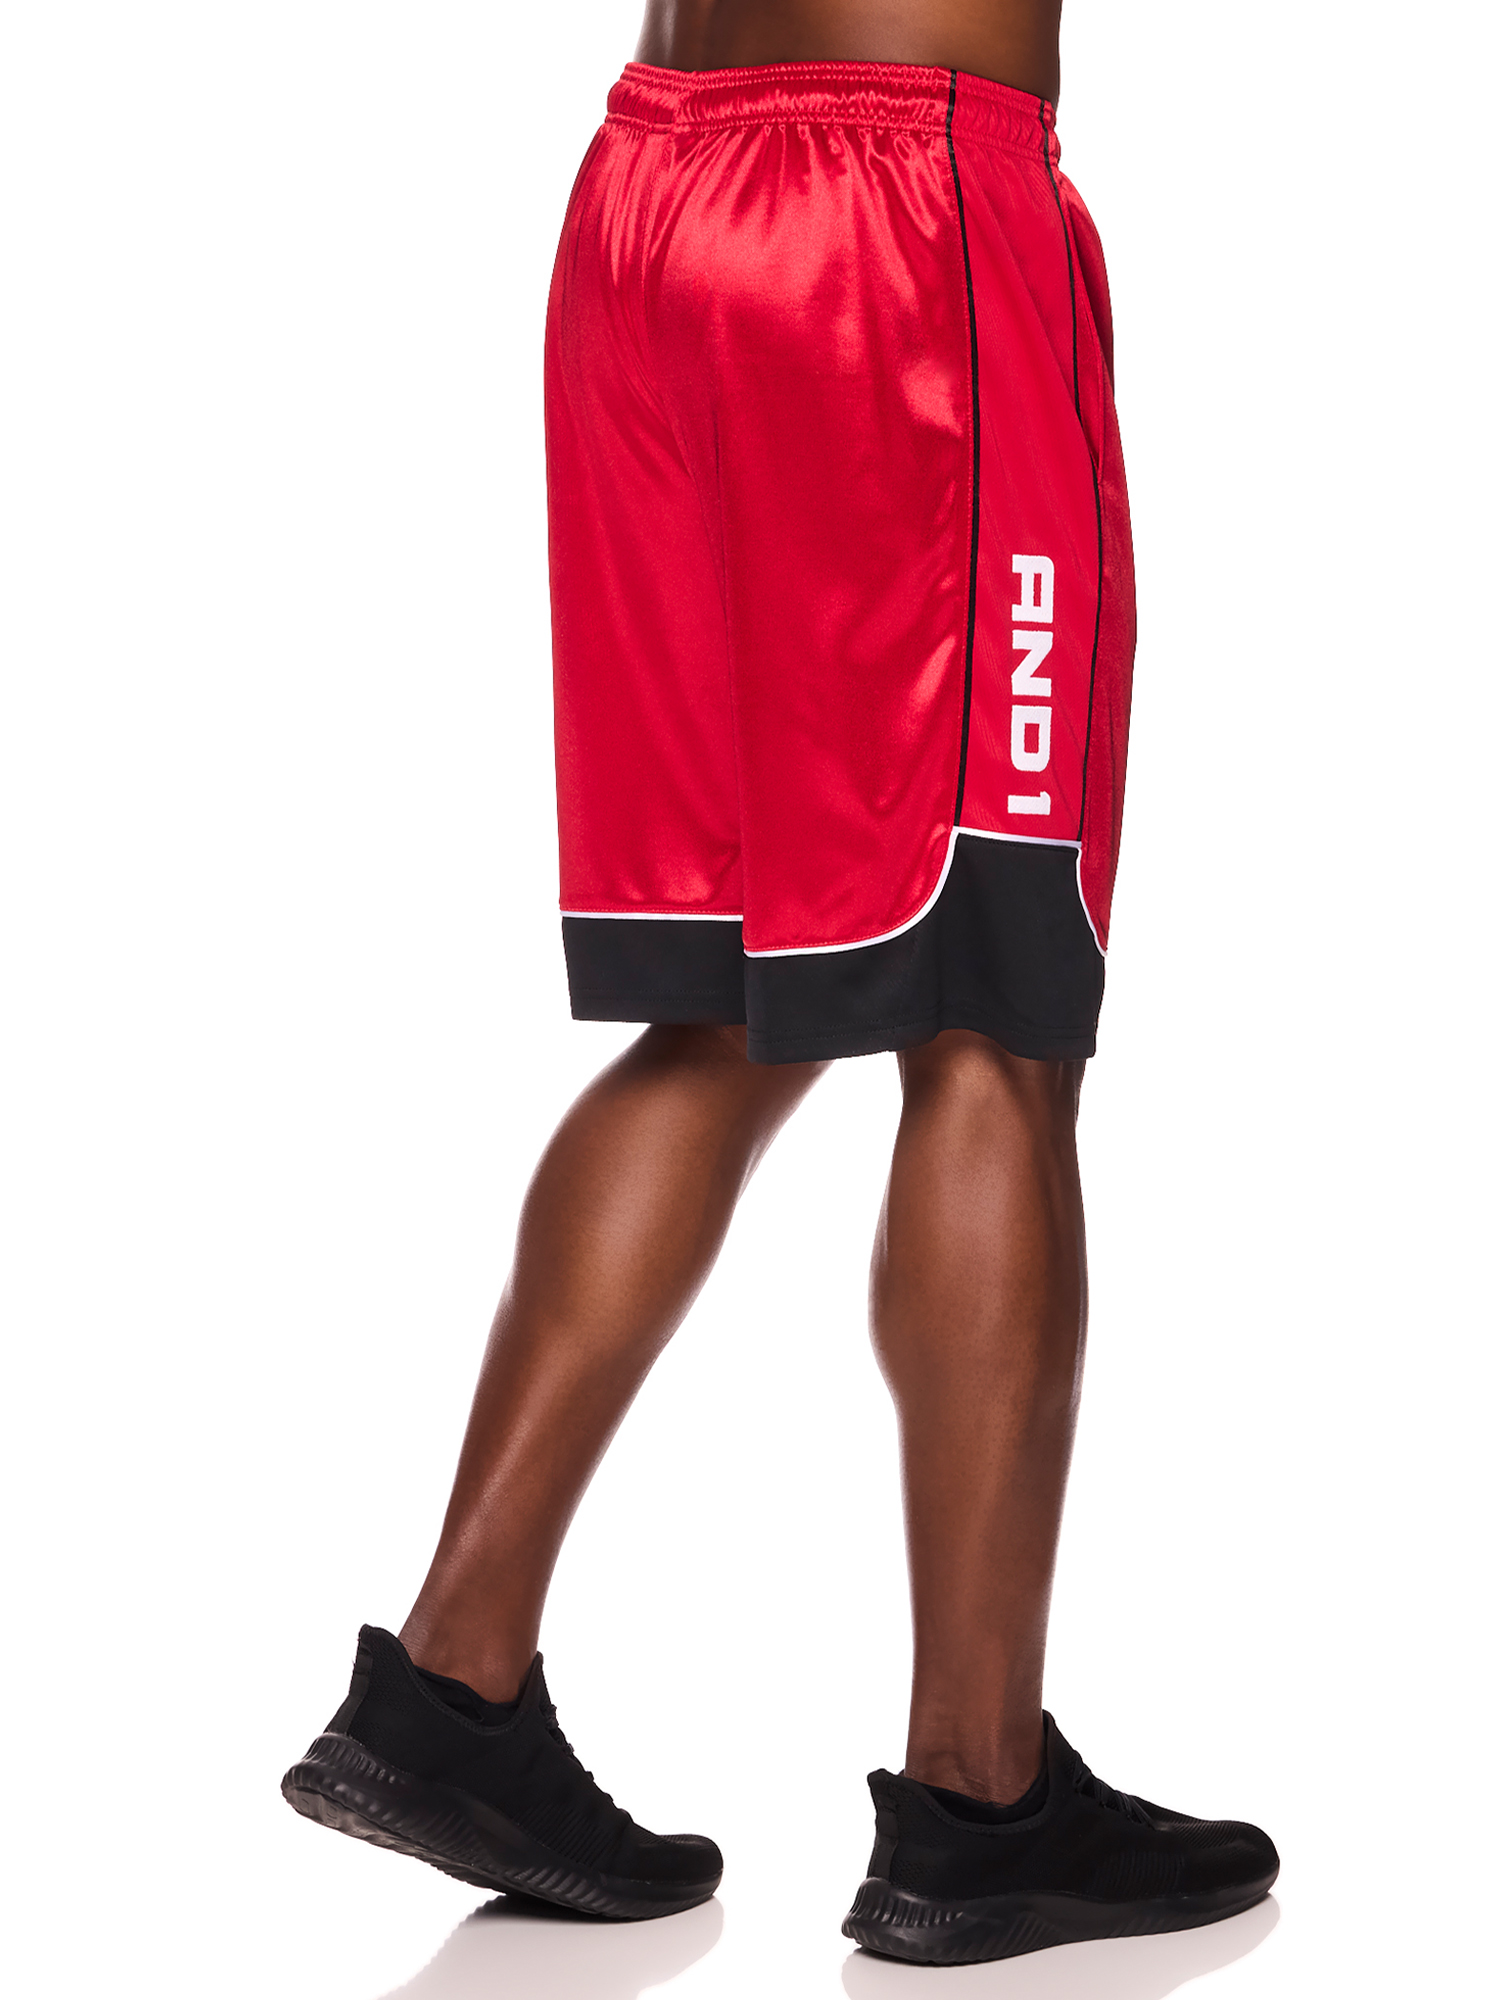 AND1 Men and Big Men's All Court Colorblock 11" Shorts, up to Size 3XL - image 2 of 5